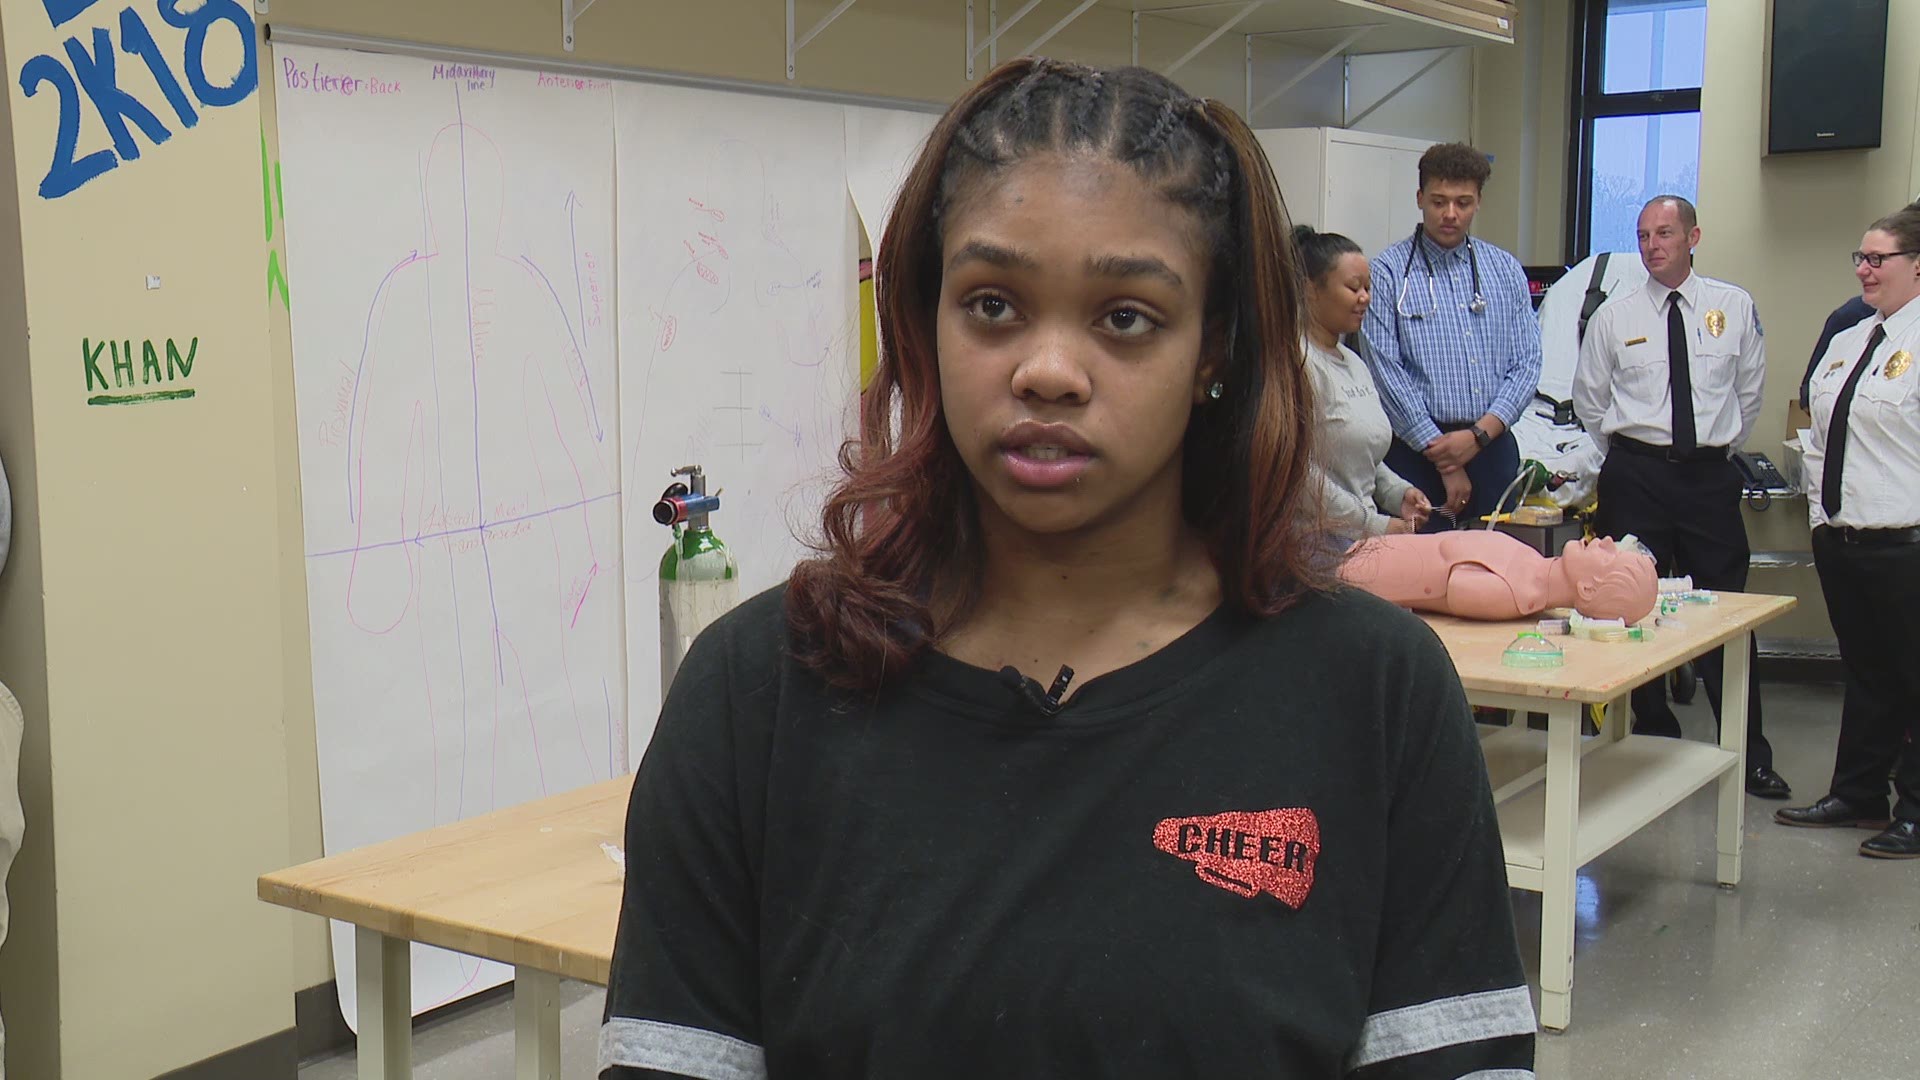 Ritenour High School students are participating in an “earn as you learn” program that will allow them to work as EMTs soon after they graduate.